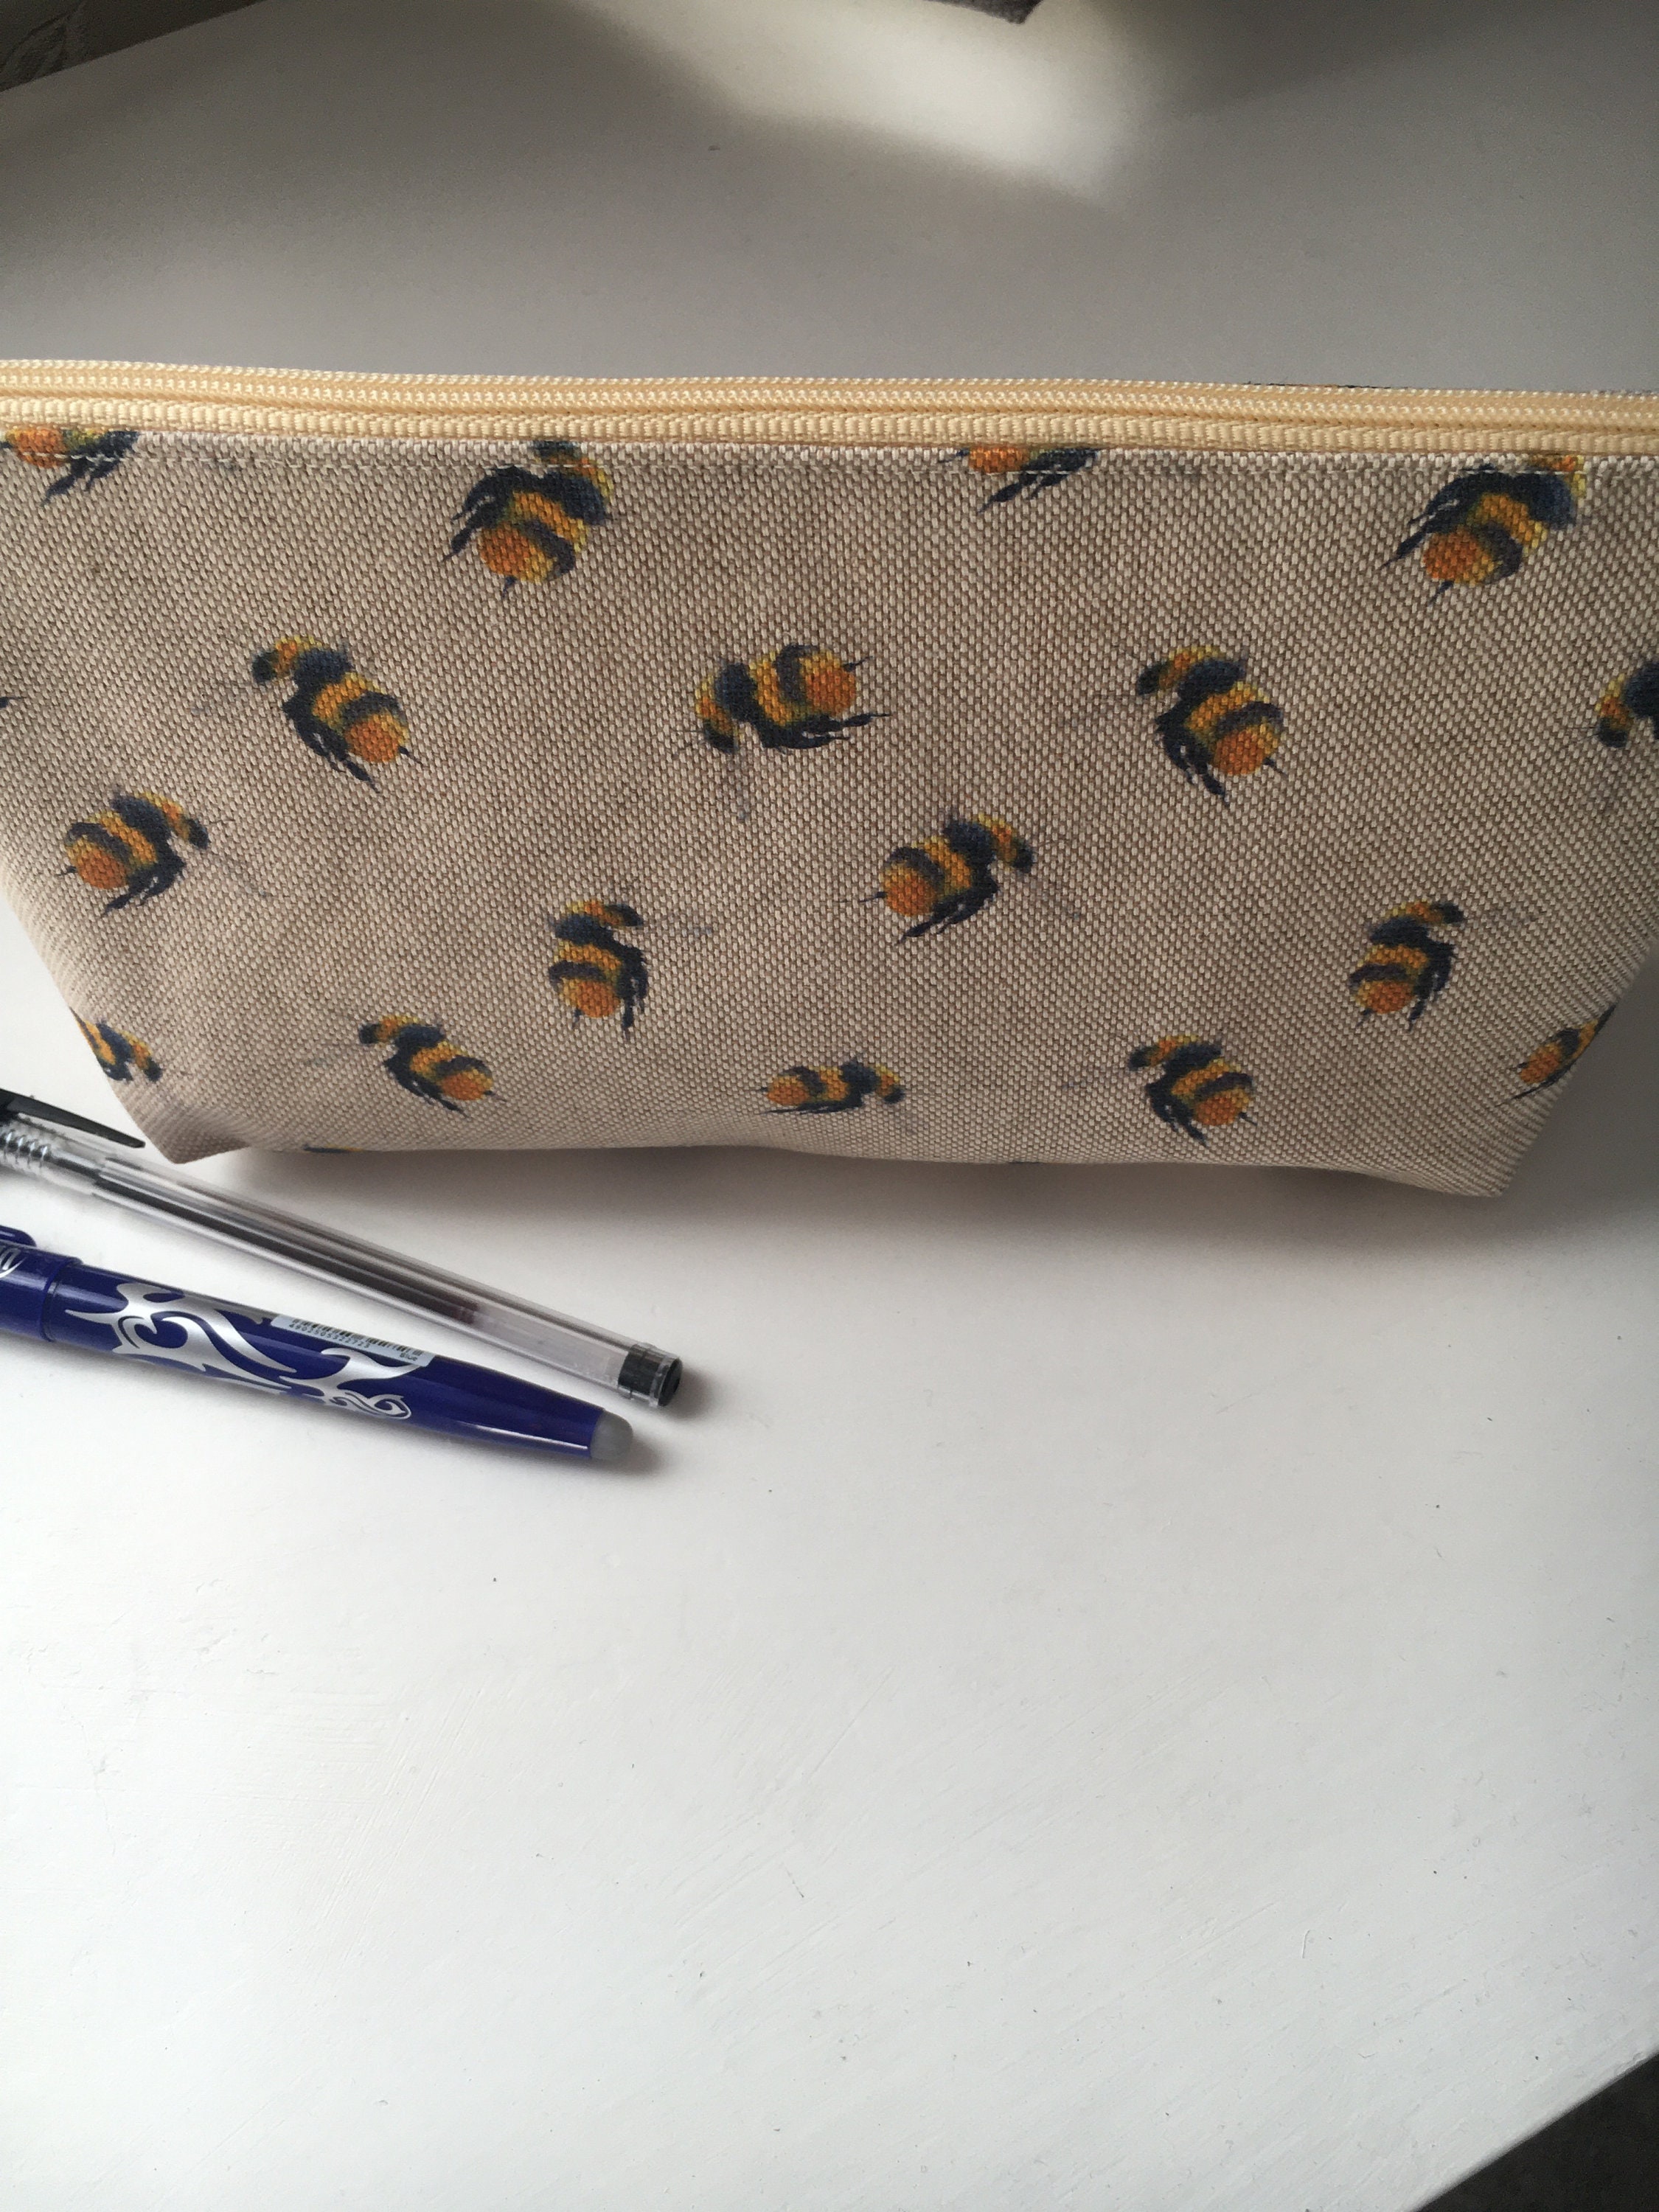 Bumble Bee Pencil Case, Bee Sunglass Pouch, Borage and Bees Cotton Pouch,  Handmade Pencil Case , Bohemian Boho Style Purse, Hippy Art Pouch 